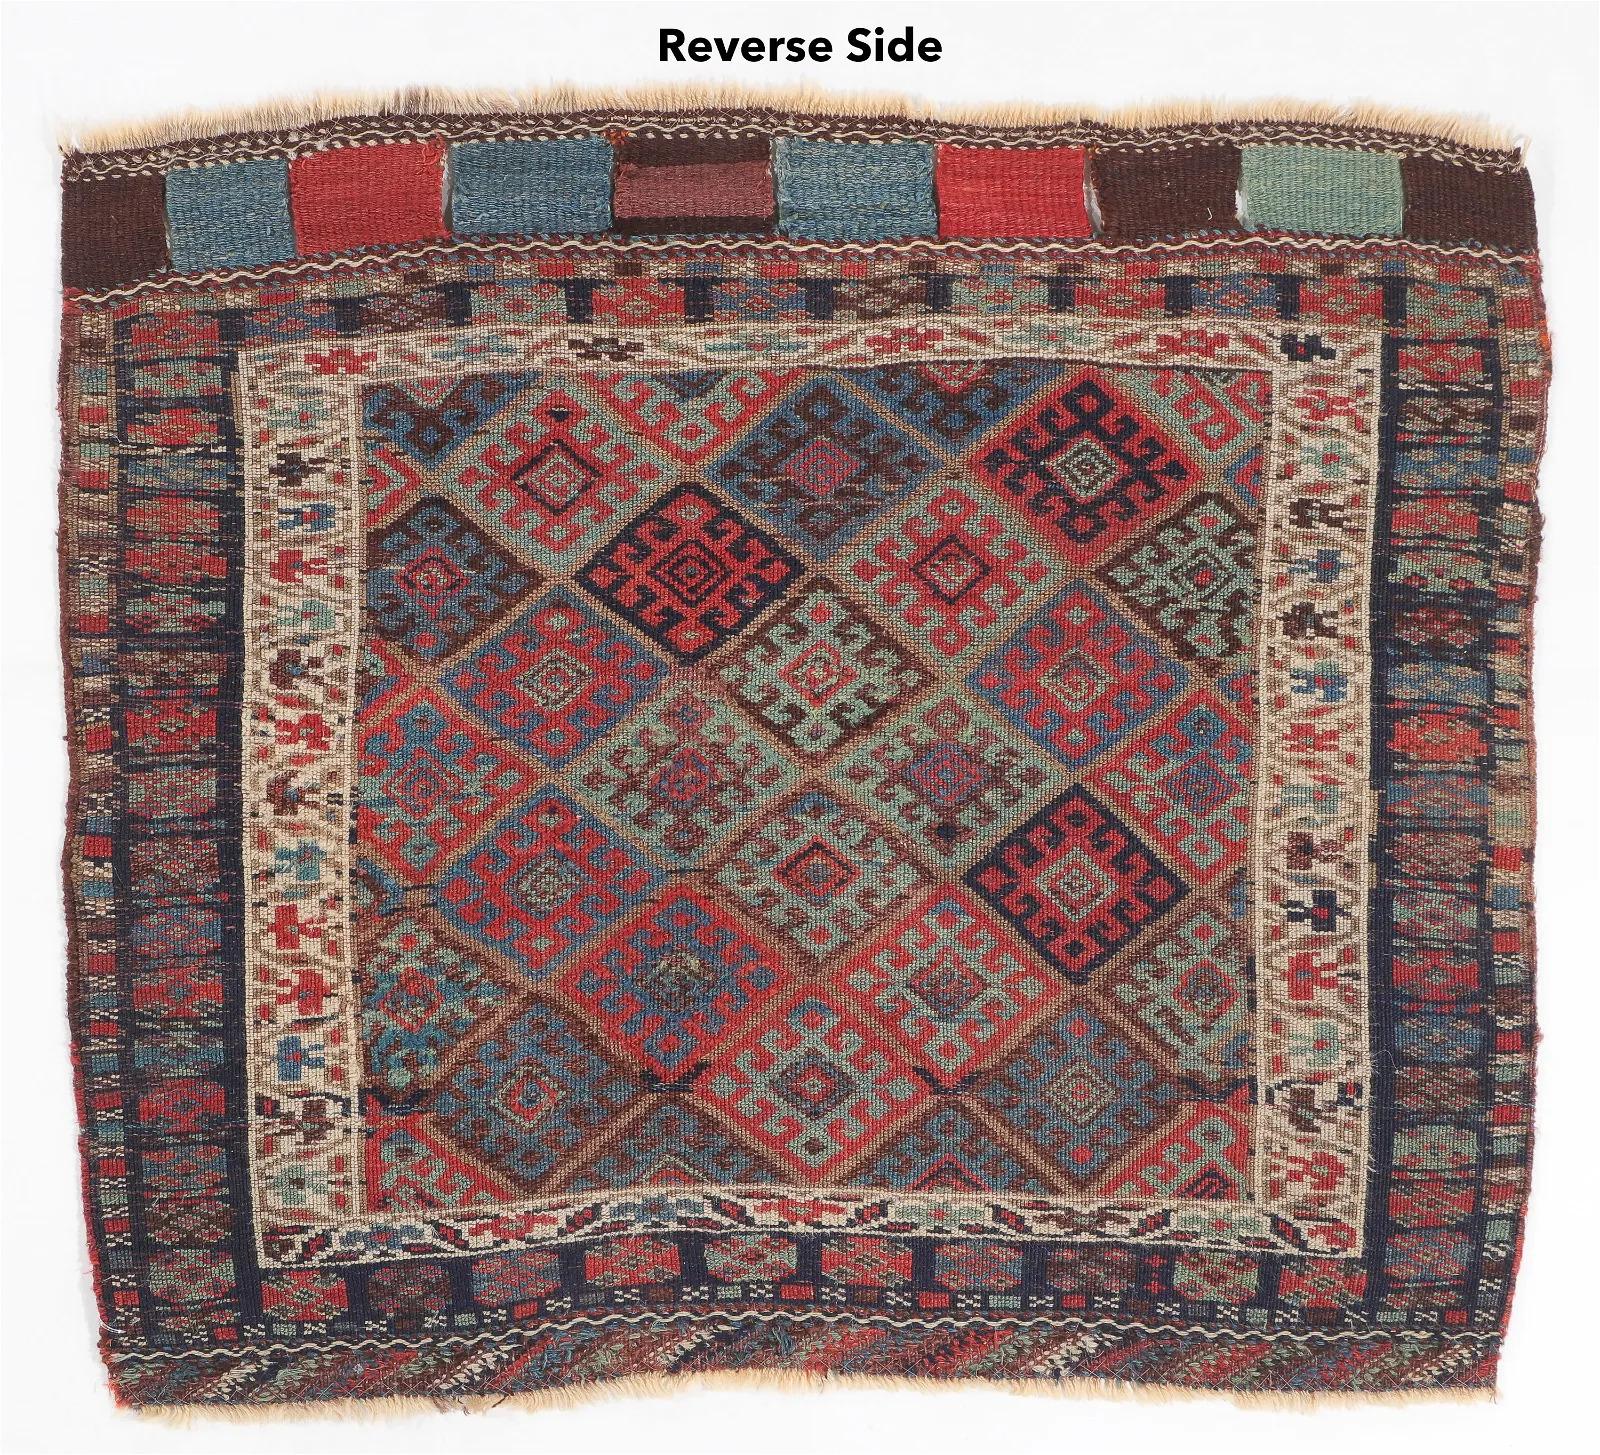 Late 19th Century Handmade Antique Persian Collectible Kurdish Jaf Rug 2.9' x 3.3', 1870s - 2B27 For Sale